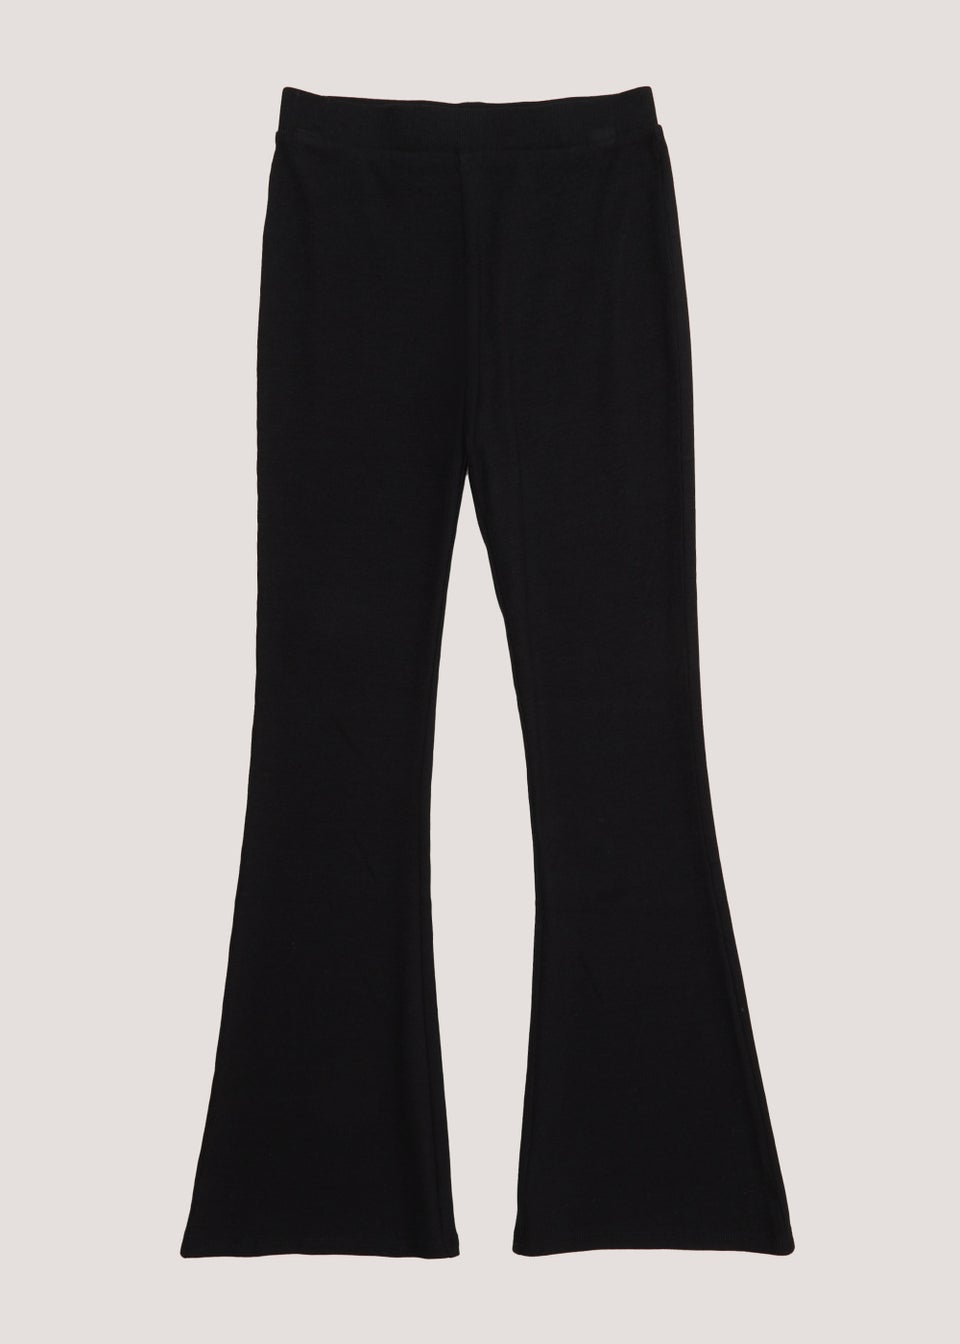 High Waist Trousers For Women Flare Leggings Ripped Black Elasticity Sexy  Flared Pants Wide Leg Palazzo Bell Pants Woman Hot  Fruugo IN